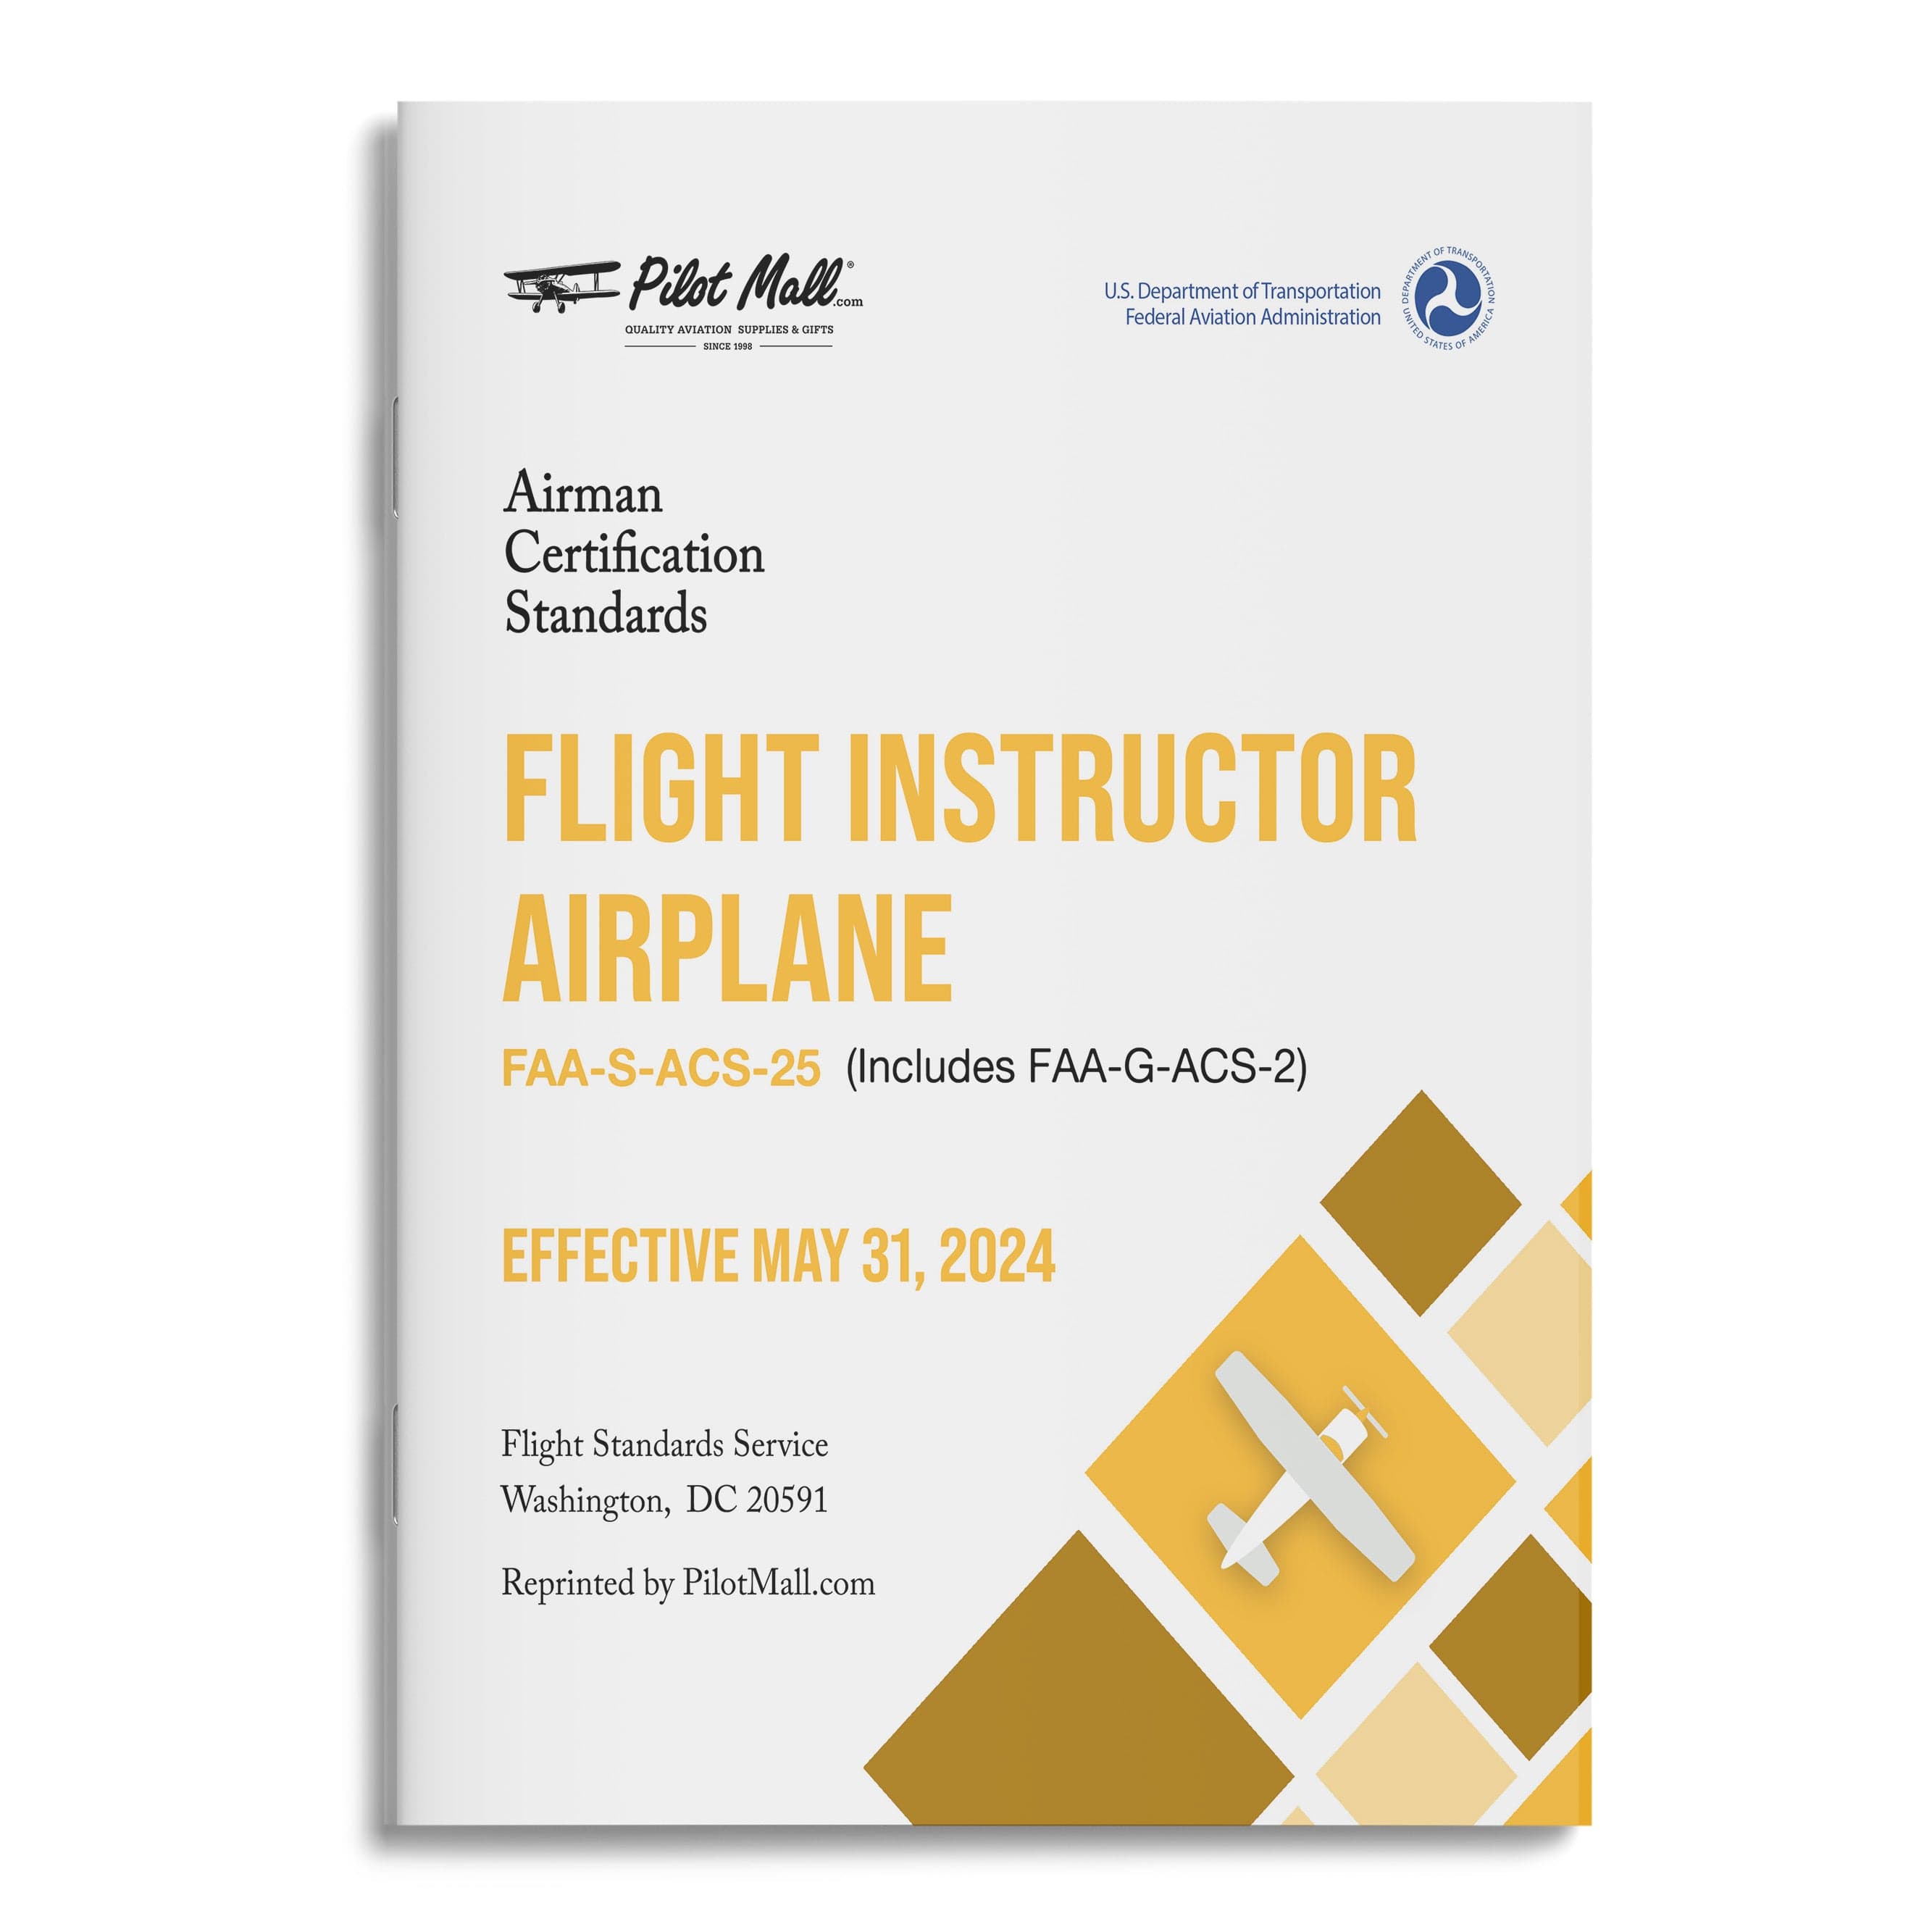 Airman Certification Standards - Flight Instructor Airplane: FAA-S-ACS-25 (Includes FAA-G-ACS-2)-Certified Flight Instructor-PilotMall.com-PilotMall.com